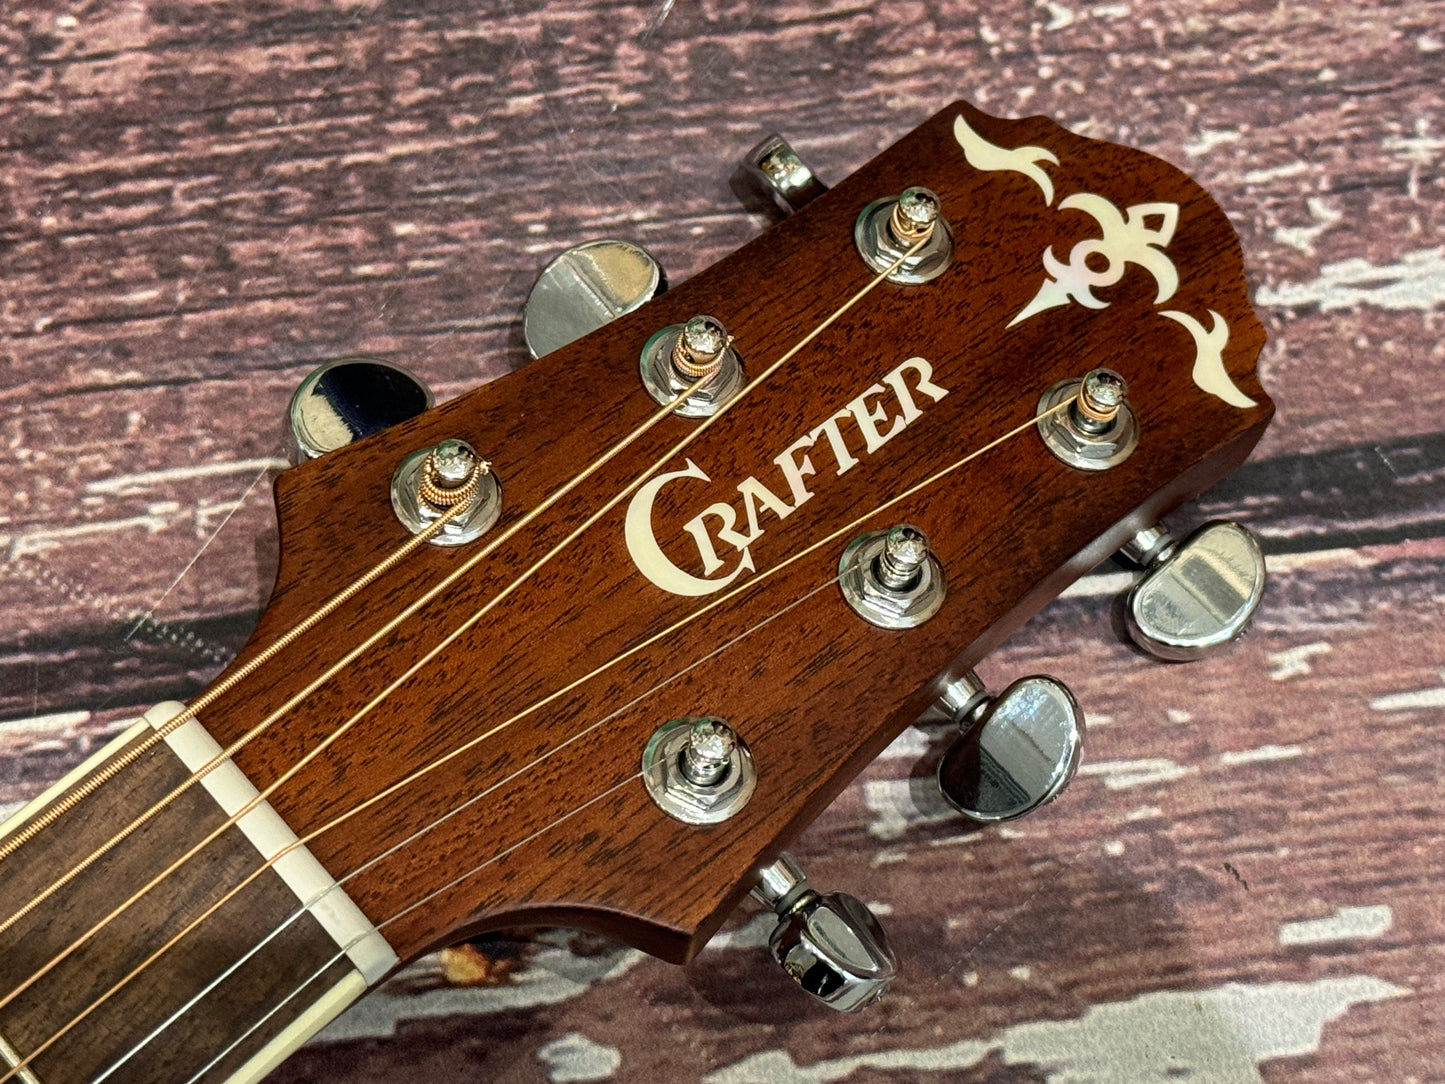 Crafter GAE-6 Natural Electro acoustic